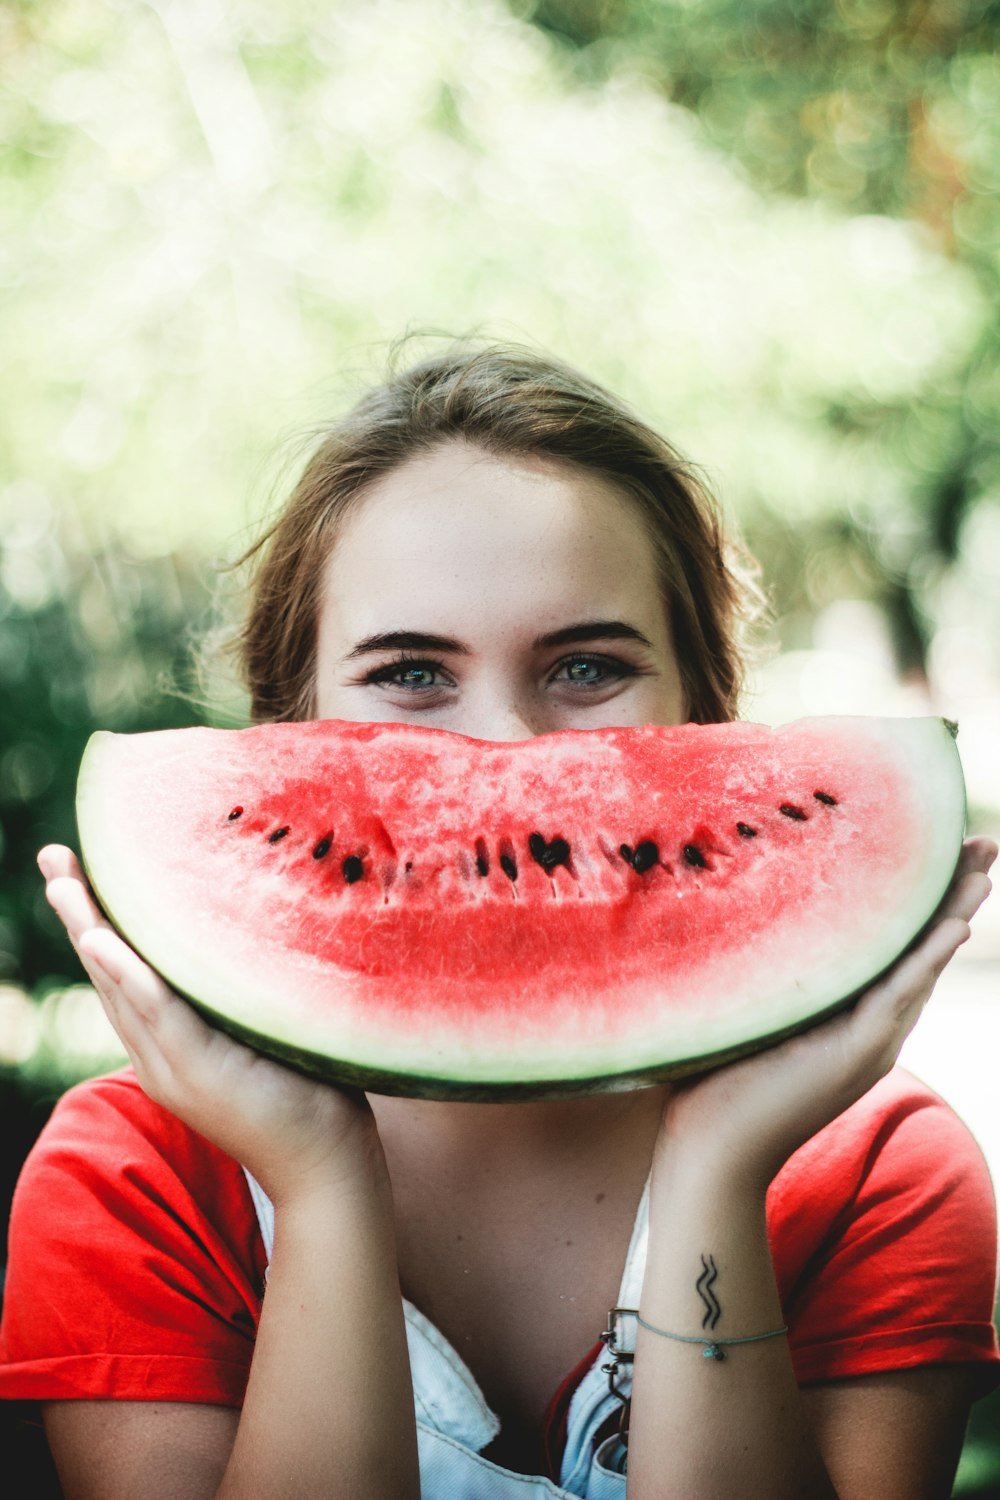 Woman Fruit Pictures | Download Free Images on Unsplash